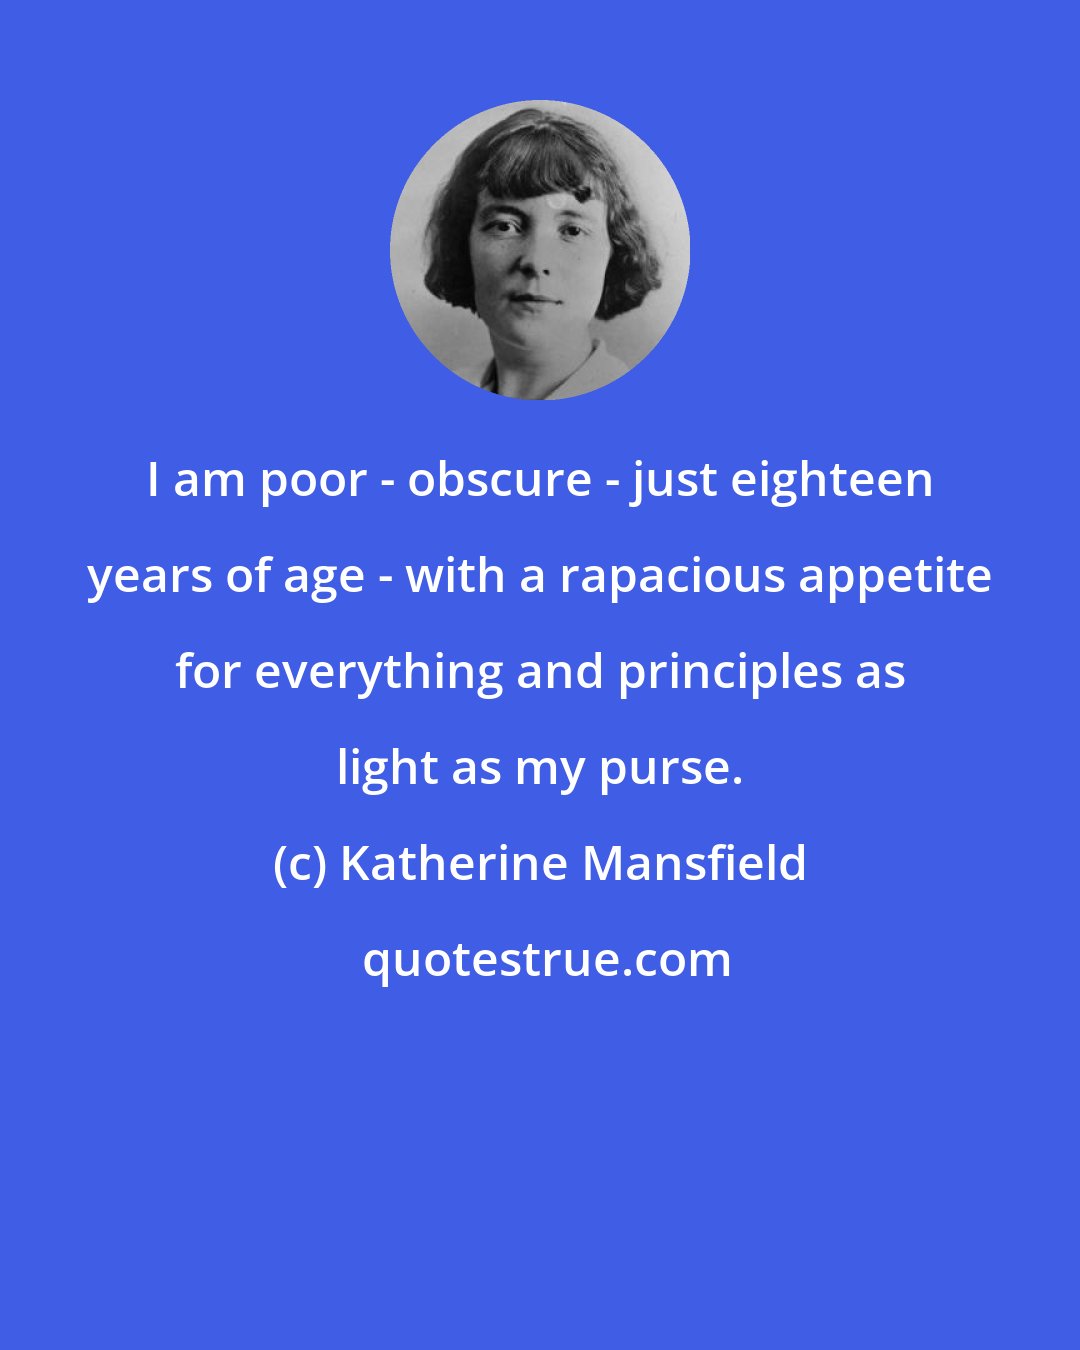 Katherine Mansfield: I am poor - obscure - just eighteen years of age - with a rapacious appetite for everything and principles as light as my purse.